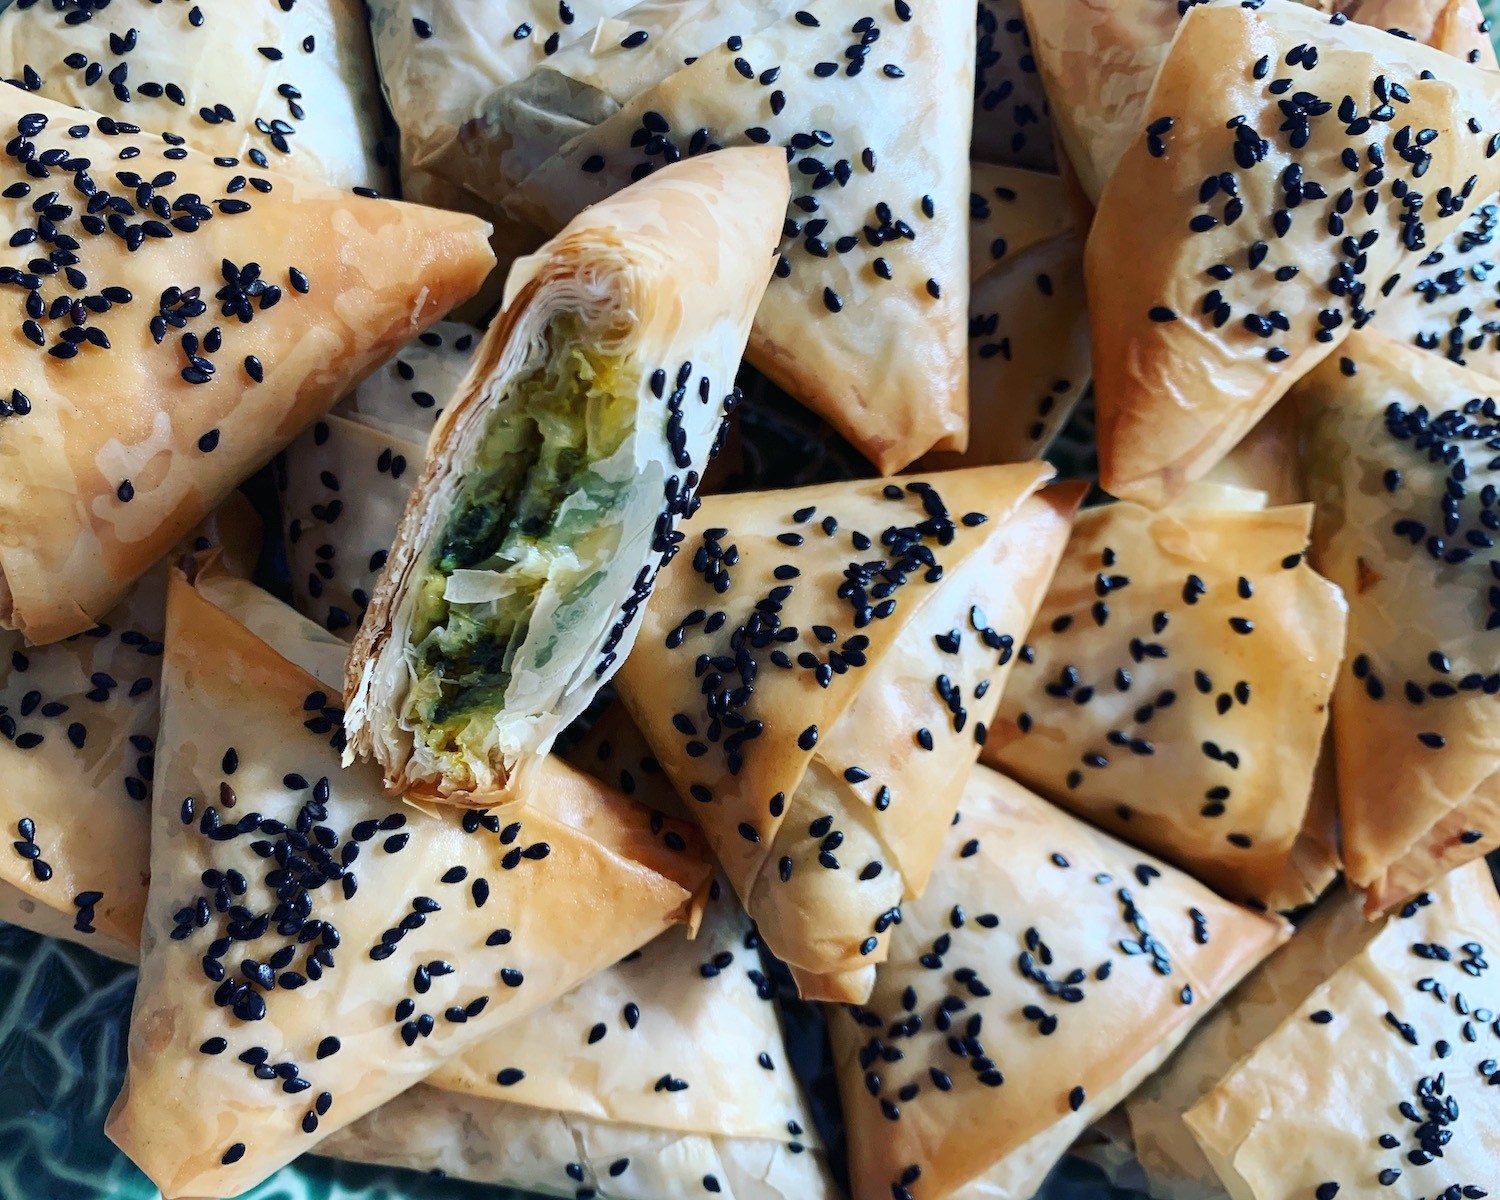 Filo dough filled with spinach and sprinkled with sesame seeds. September 2020